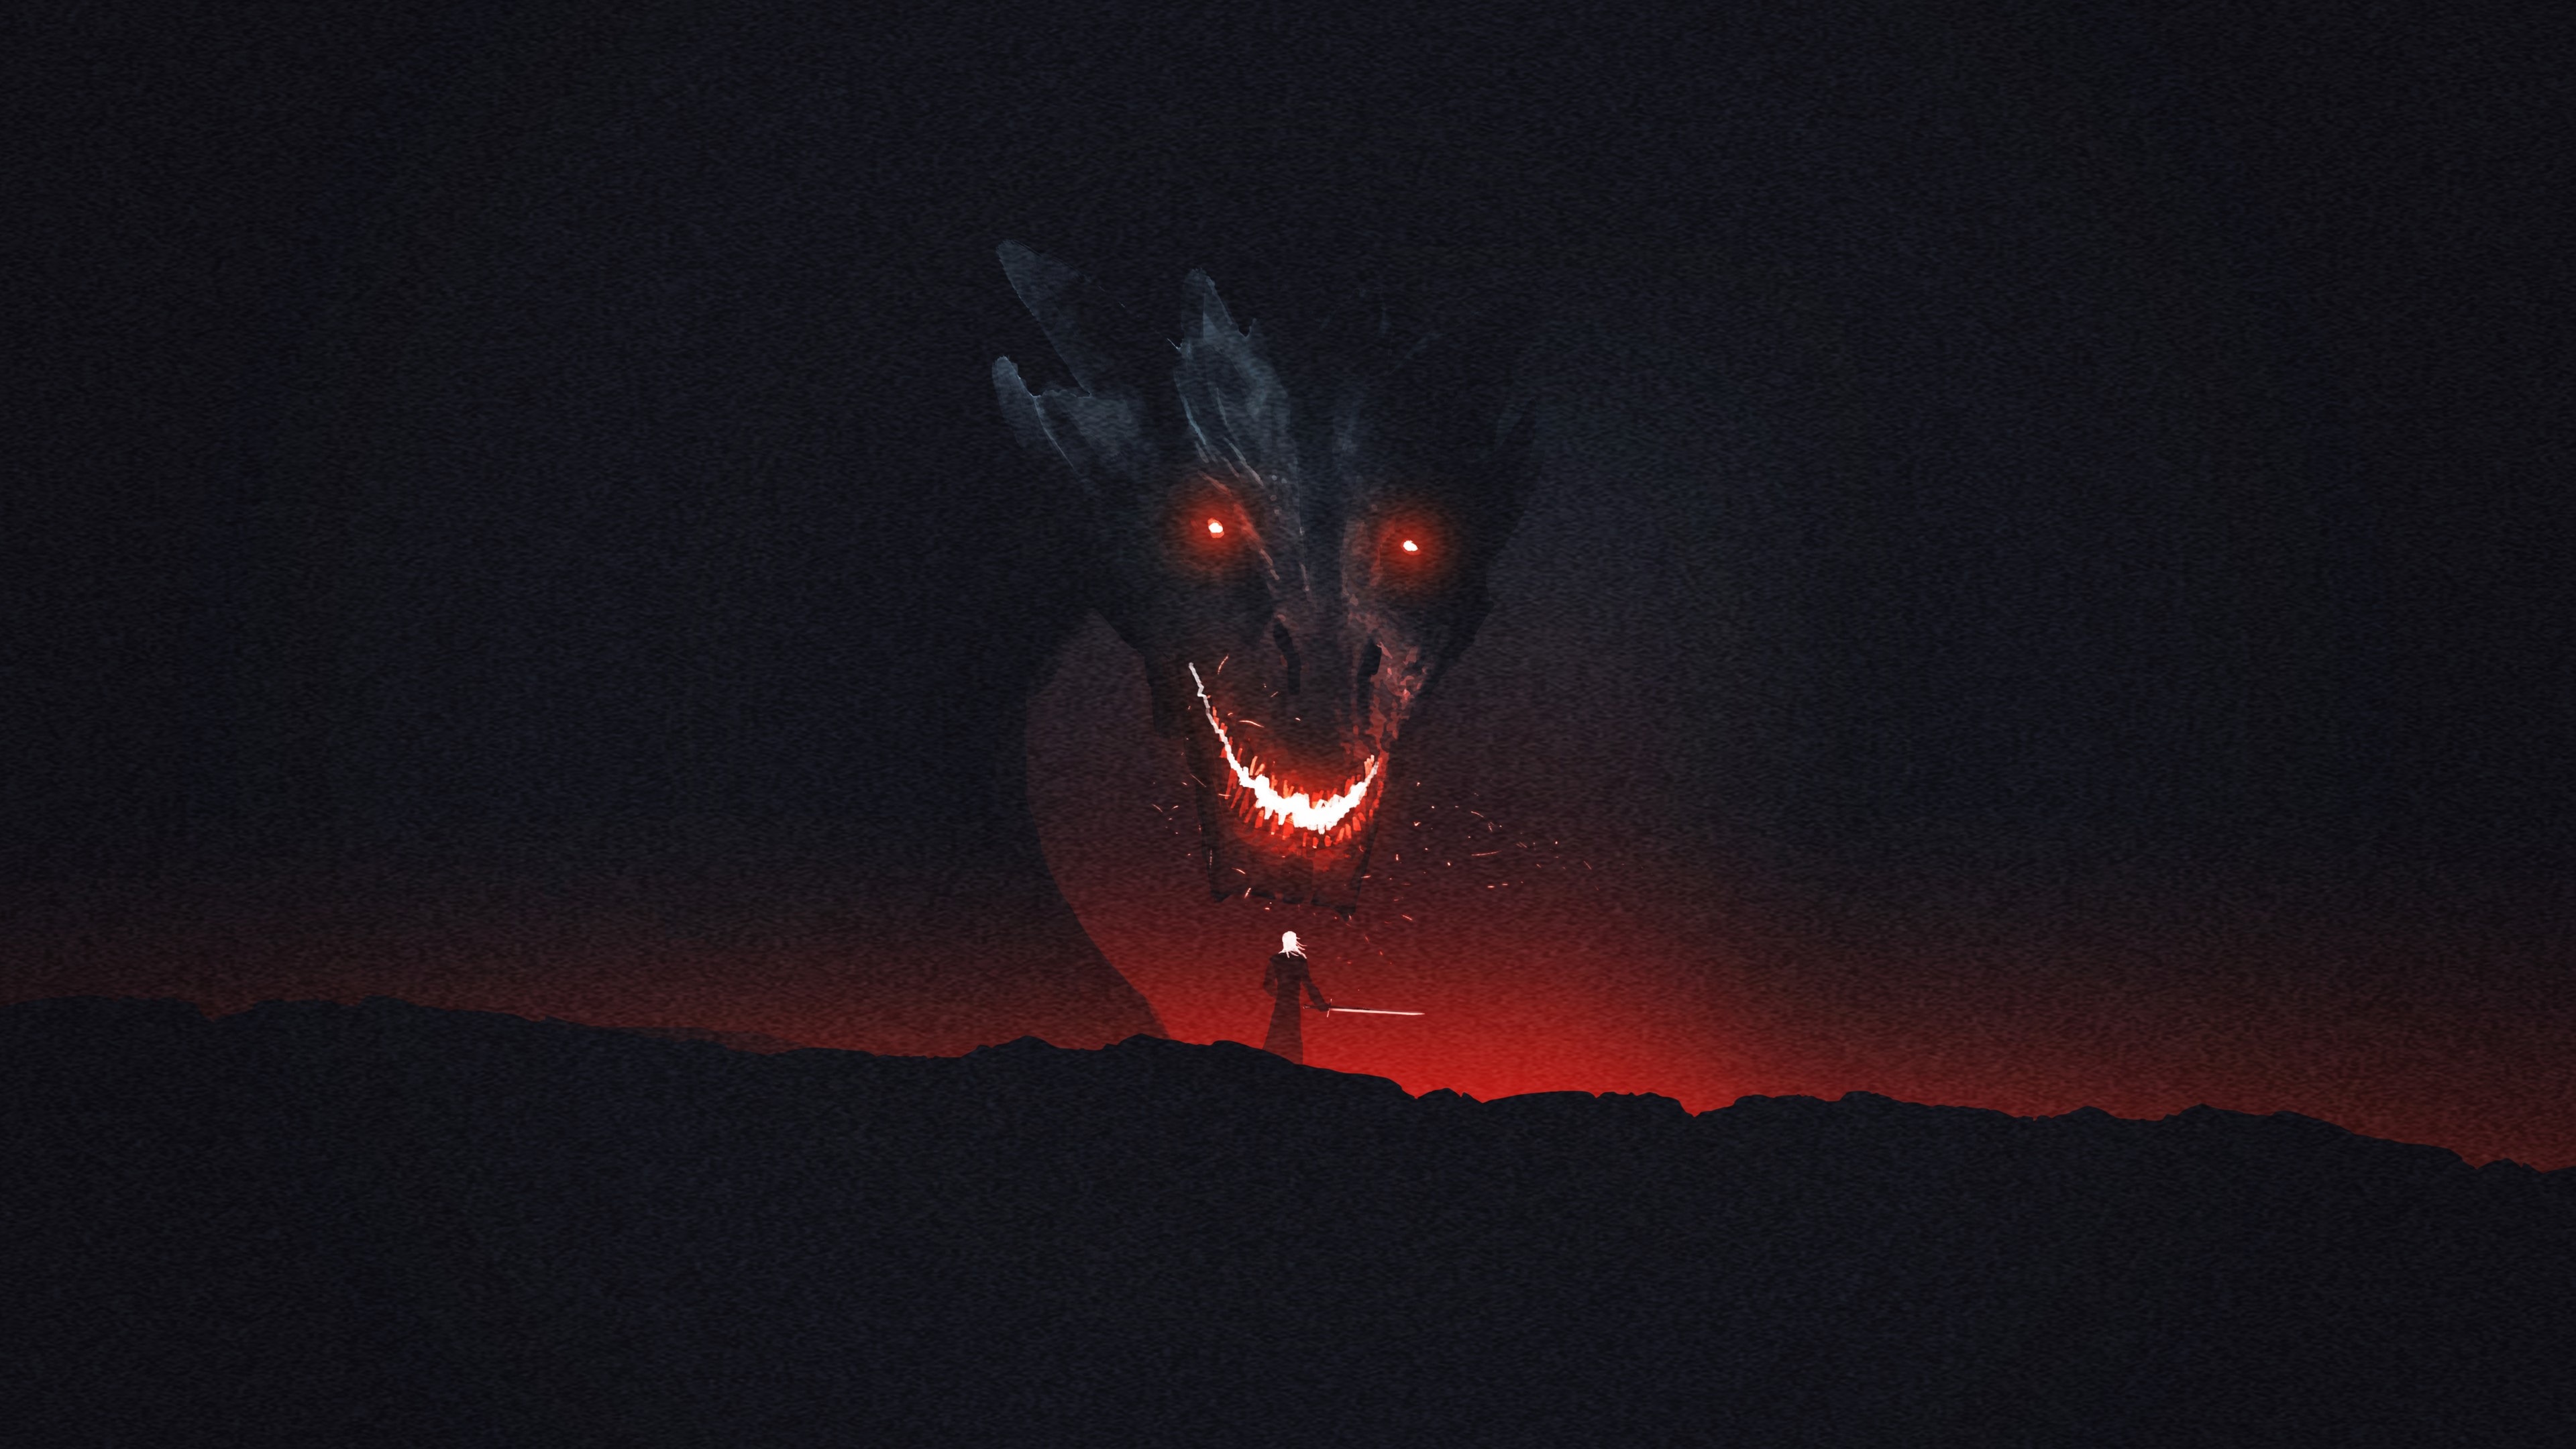 Wallpaper Black and Red Dragon on Fire During Night Time Background   Download Free Image